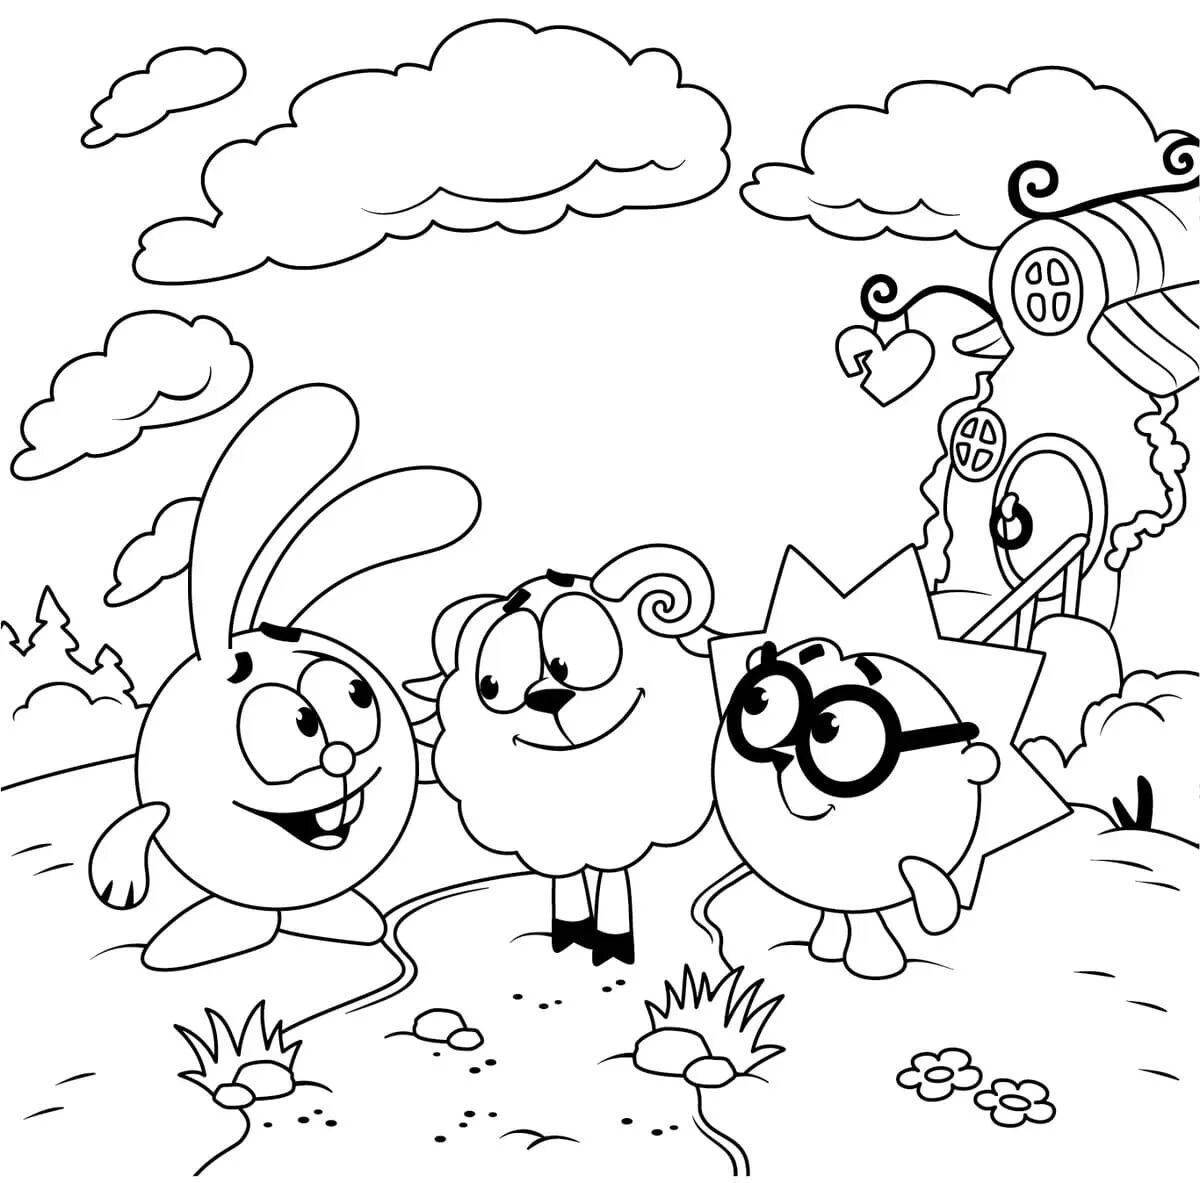 Coloring pages for kids Smeshariki filled with colors